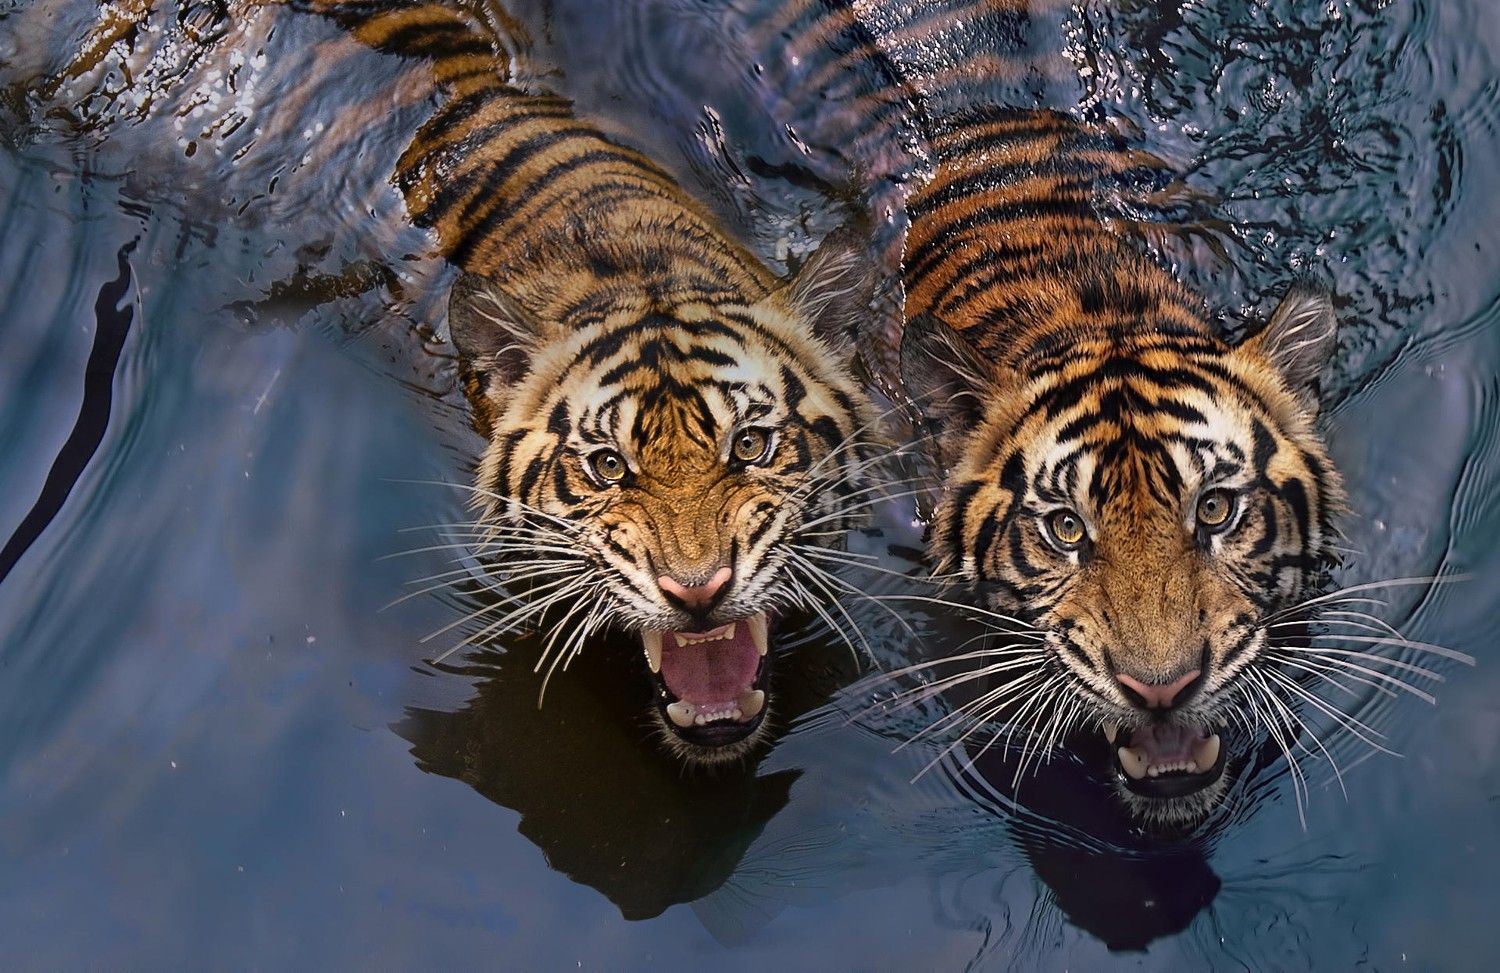 Tiger Photography. Tigers Photo That Will Leave You Spellbound